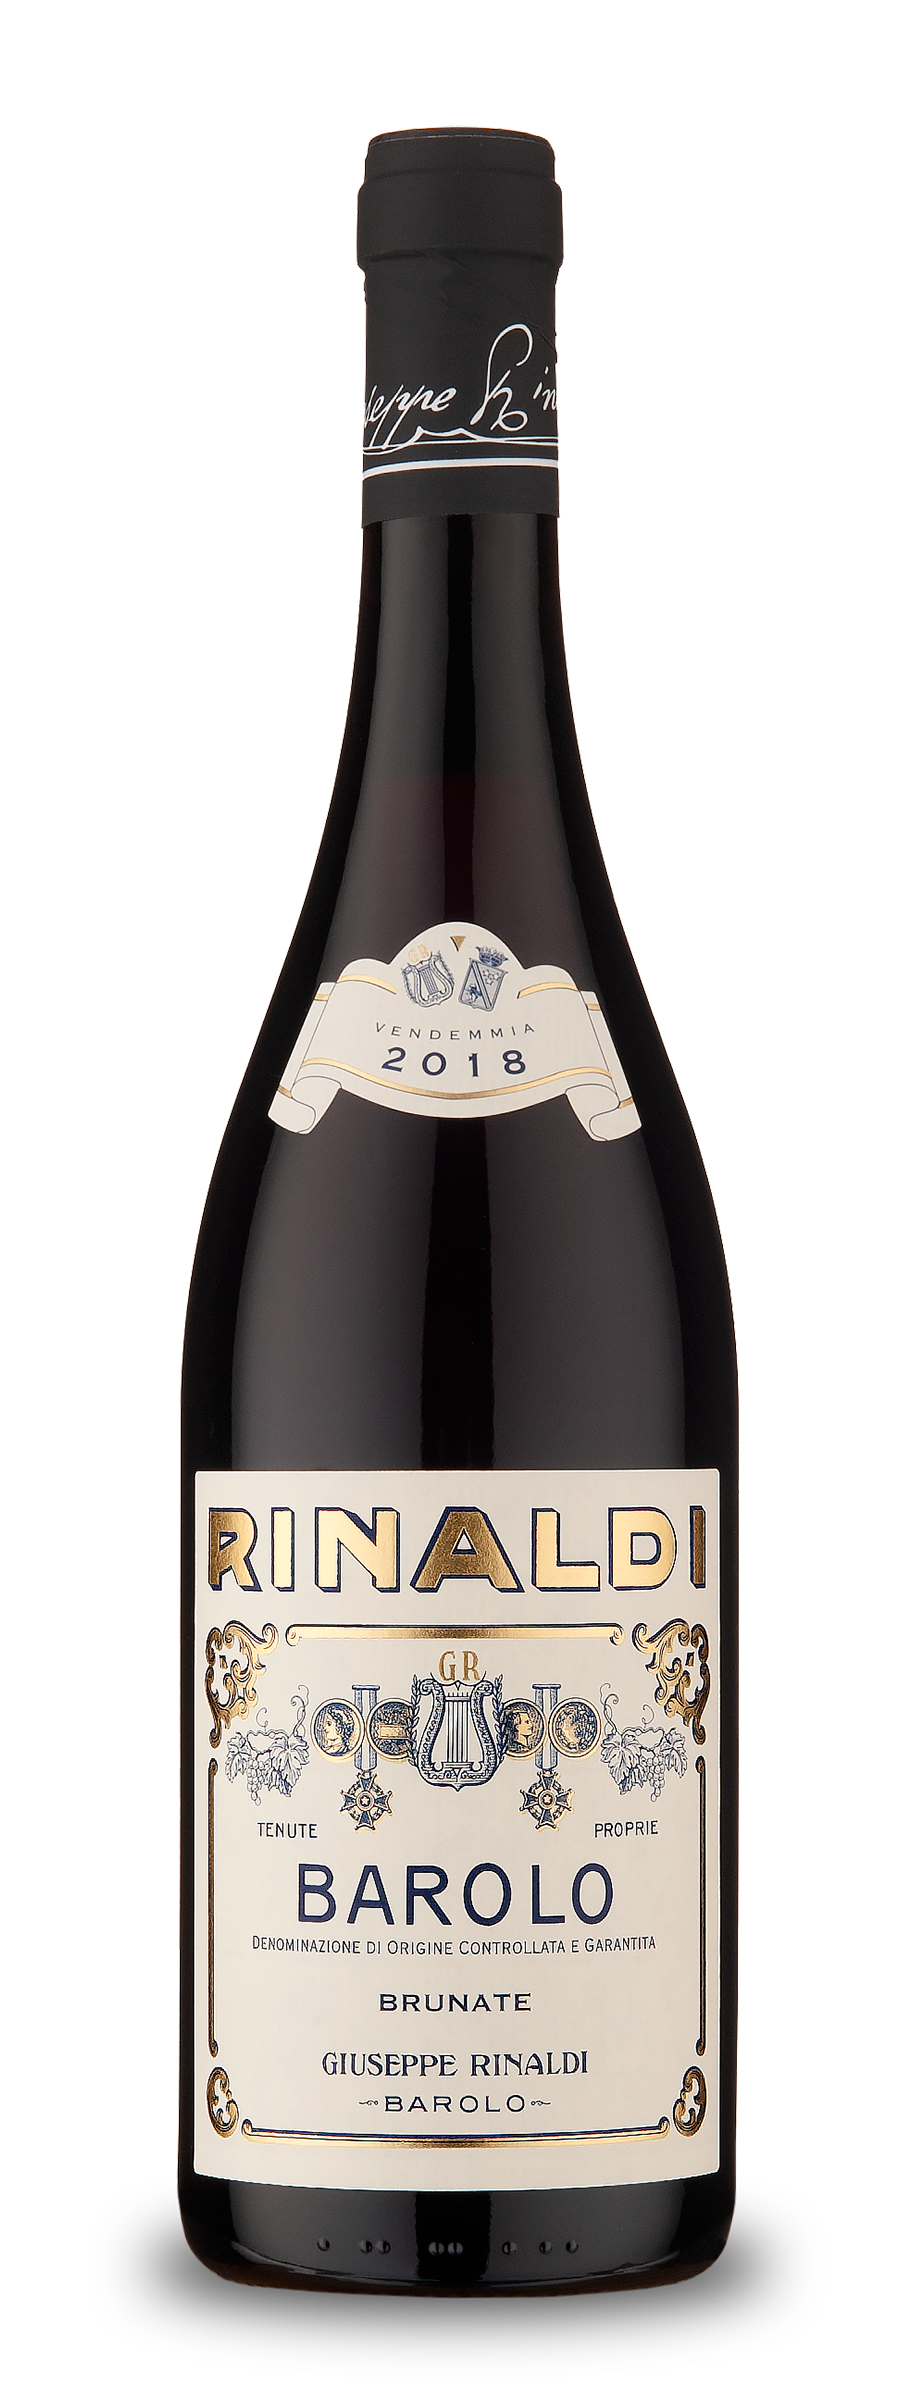 Barolo Brunate 2018 1,5l - ONLY ON PRE-ALLOCATION Contact us for further information (indulge@flemmings.wine)